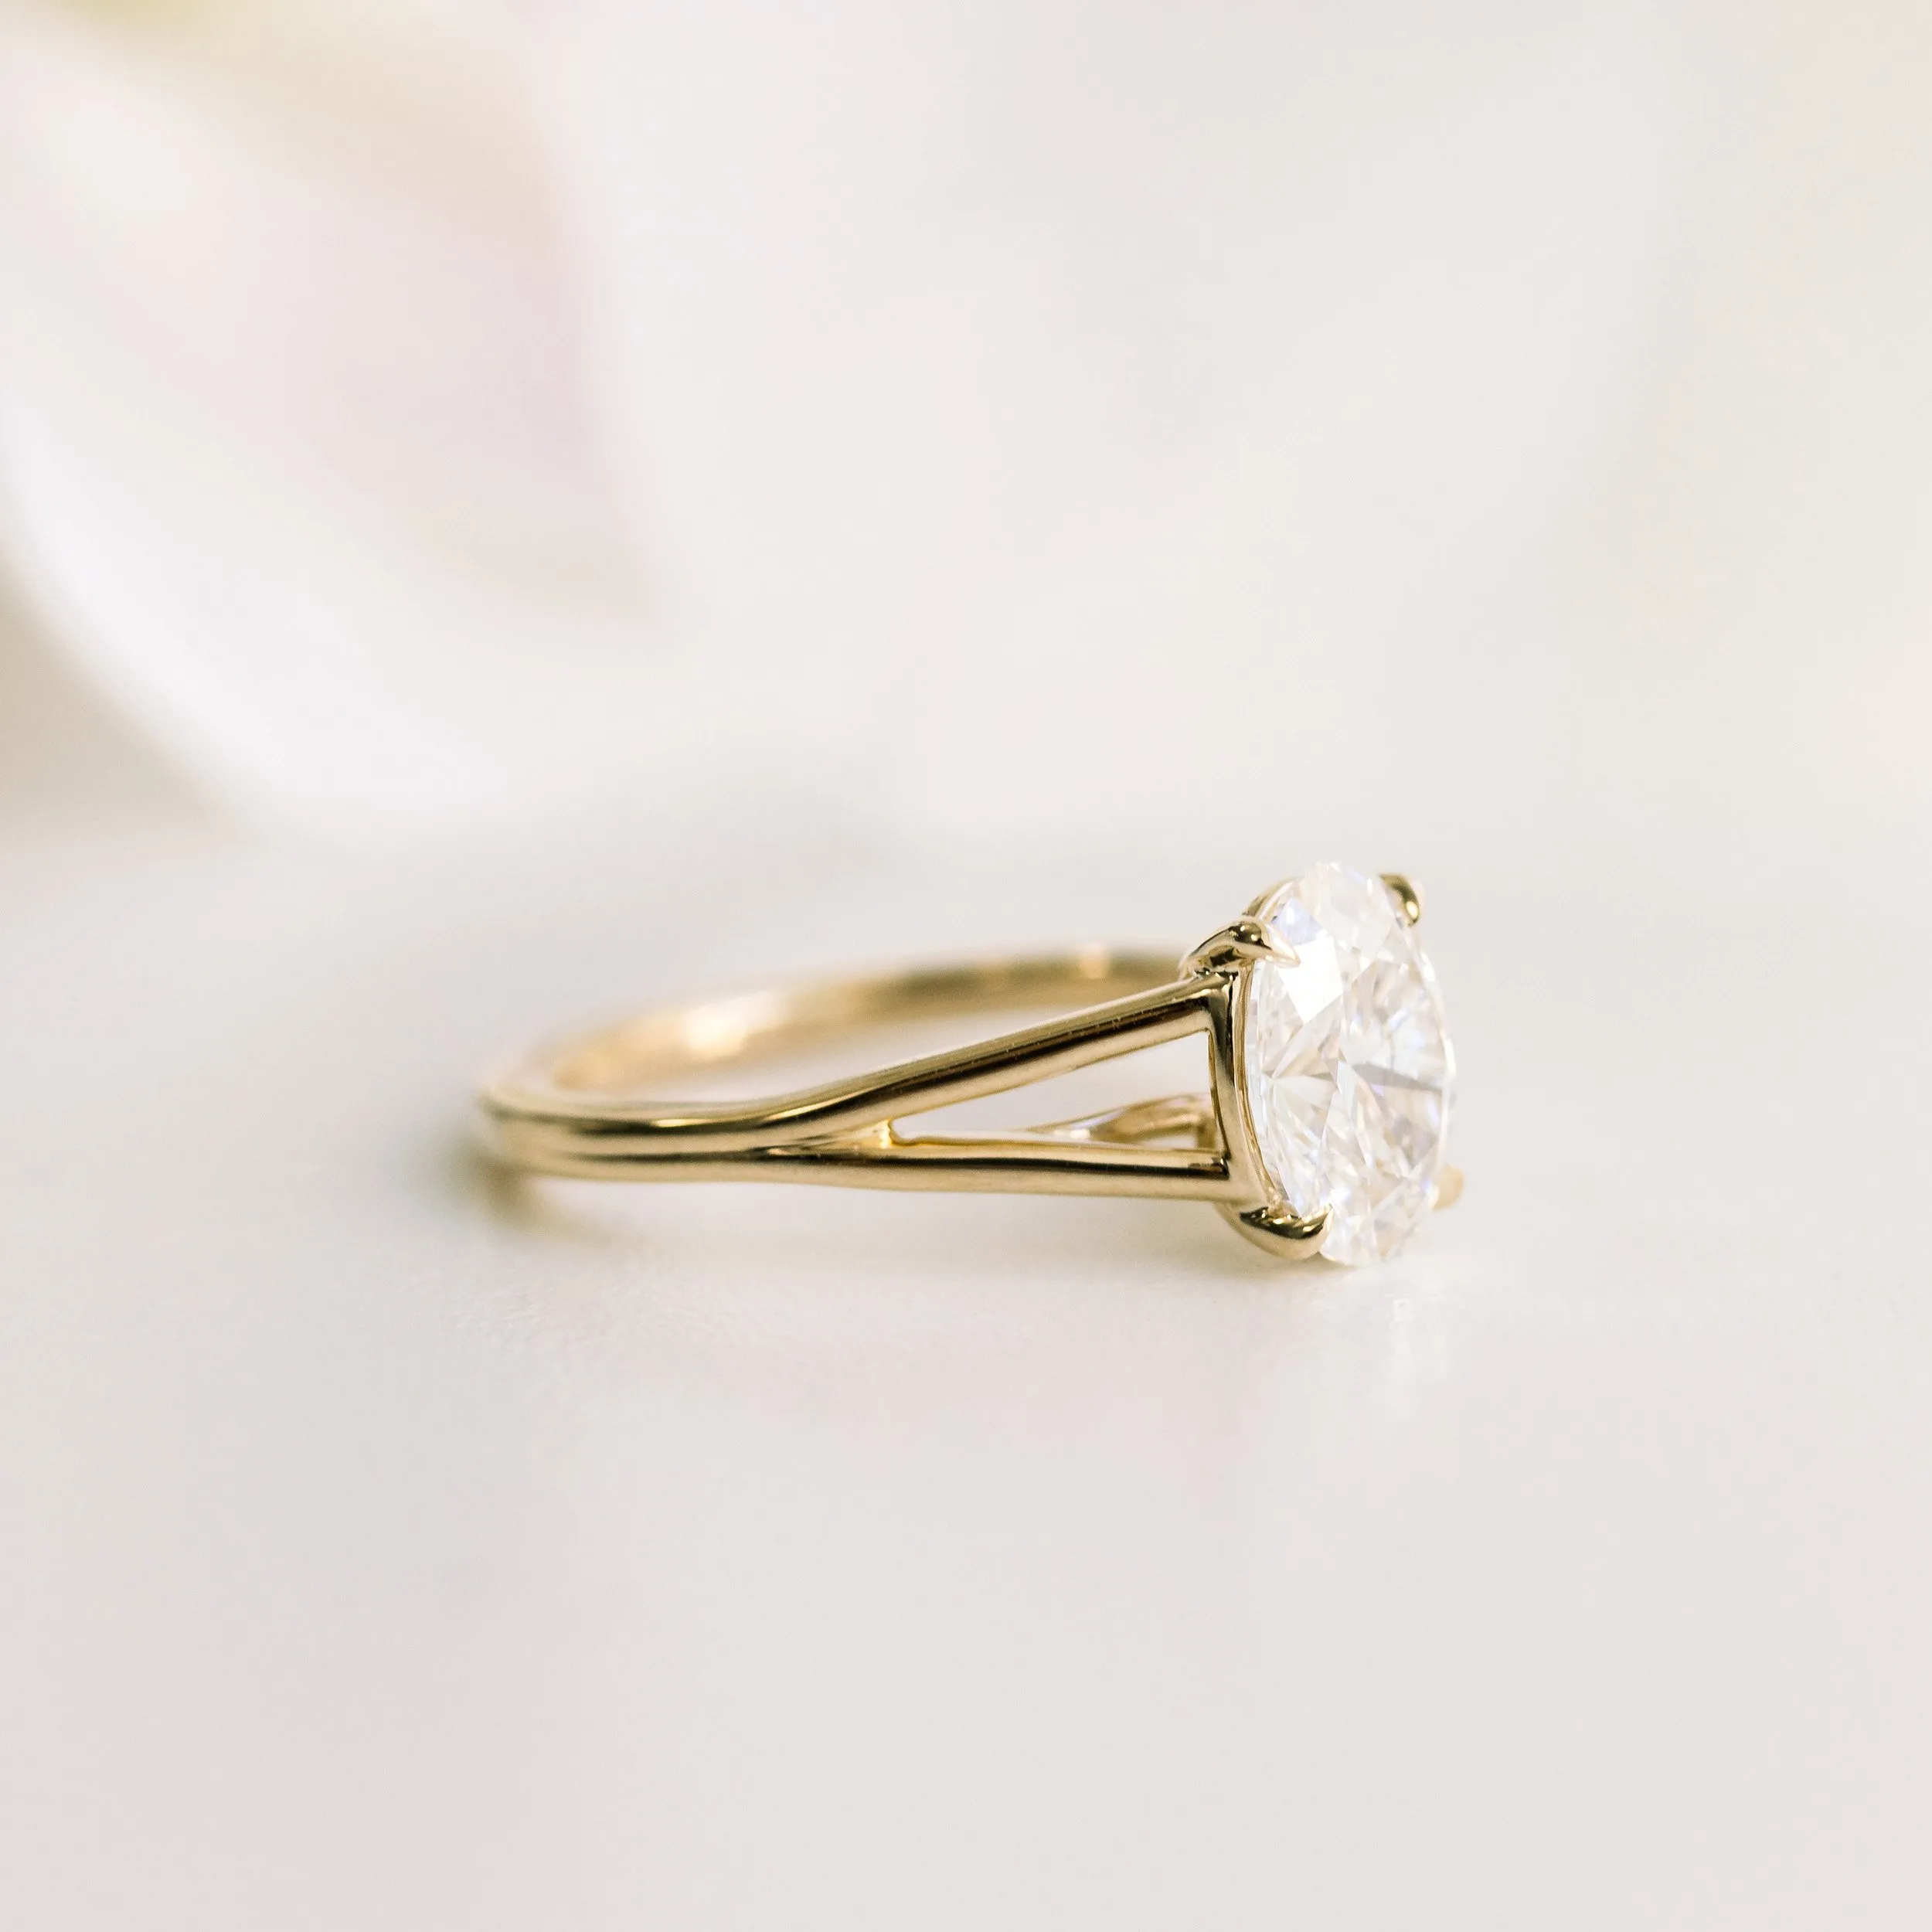 14k yellow gold 1.75 ct oval man made diamond in split shank solitaire engagement ring ada diamonds design ad 338 profile view